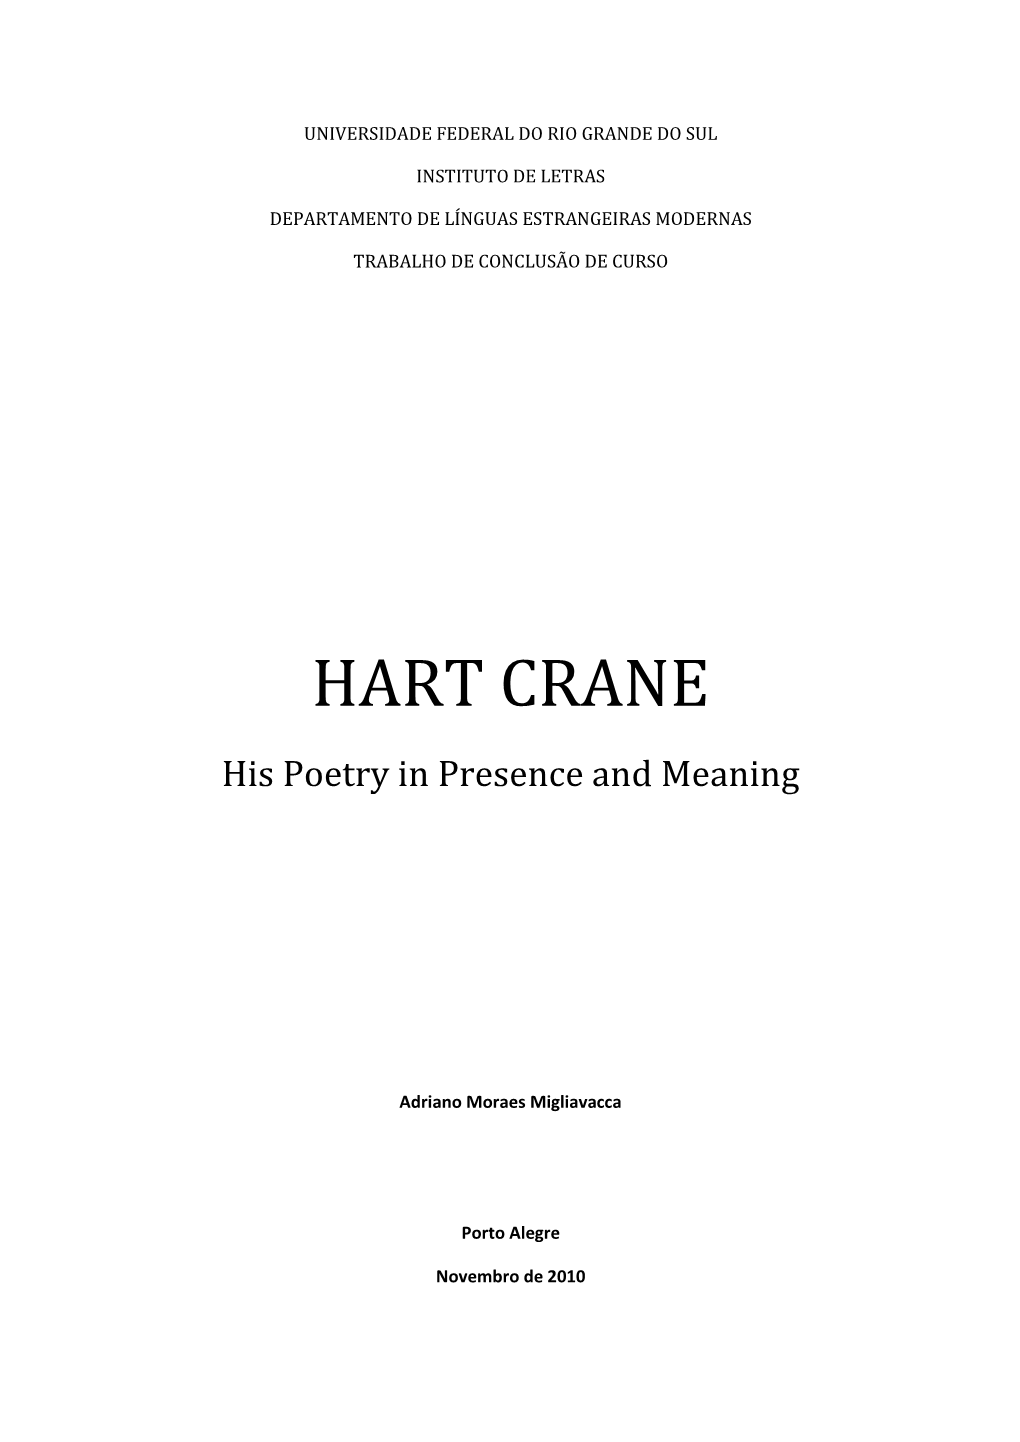 HART CRANE His Poetry in Presence and Meaning